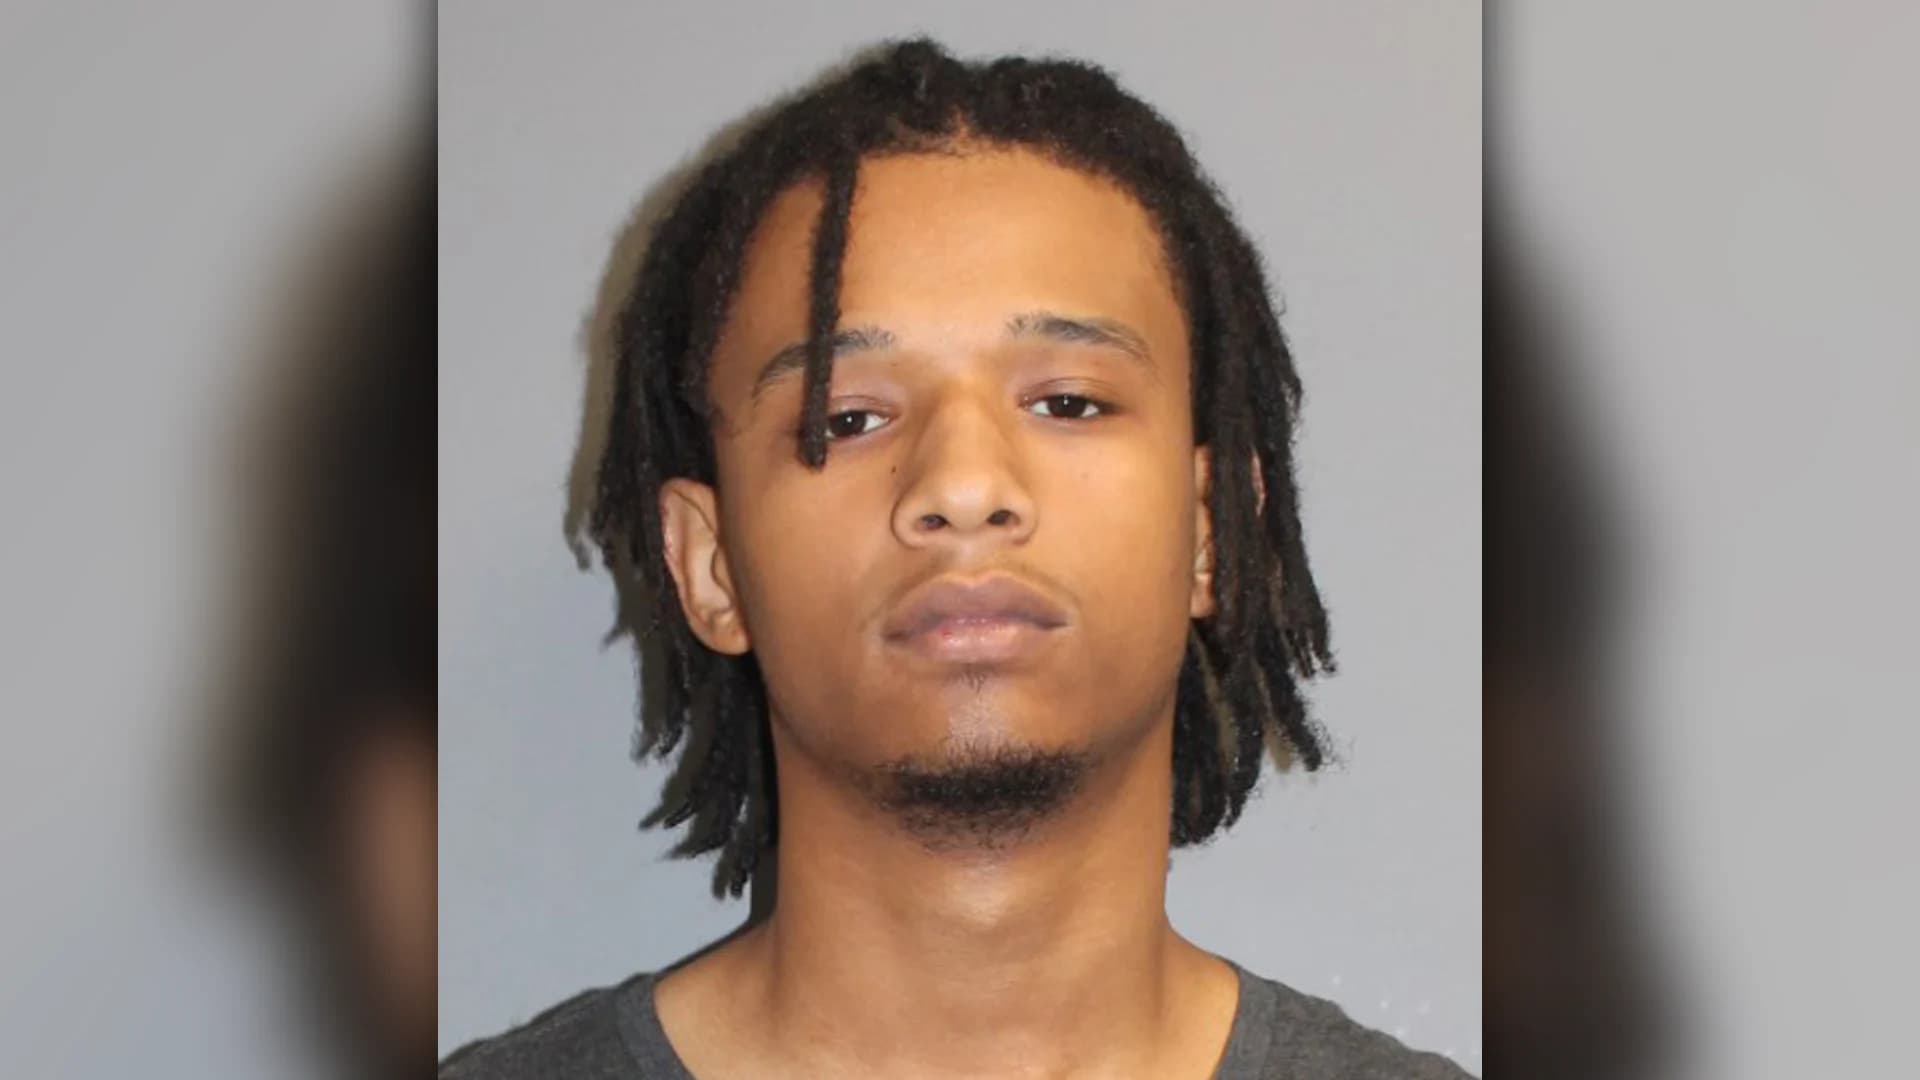 Bridgeport man accused of armed robbery, assault arrested after traffic stop in New York